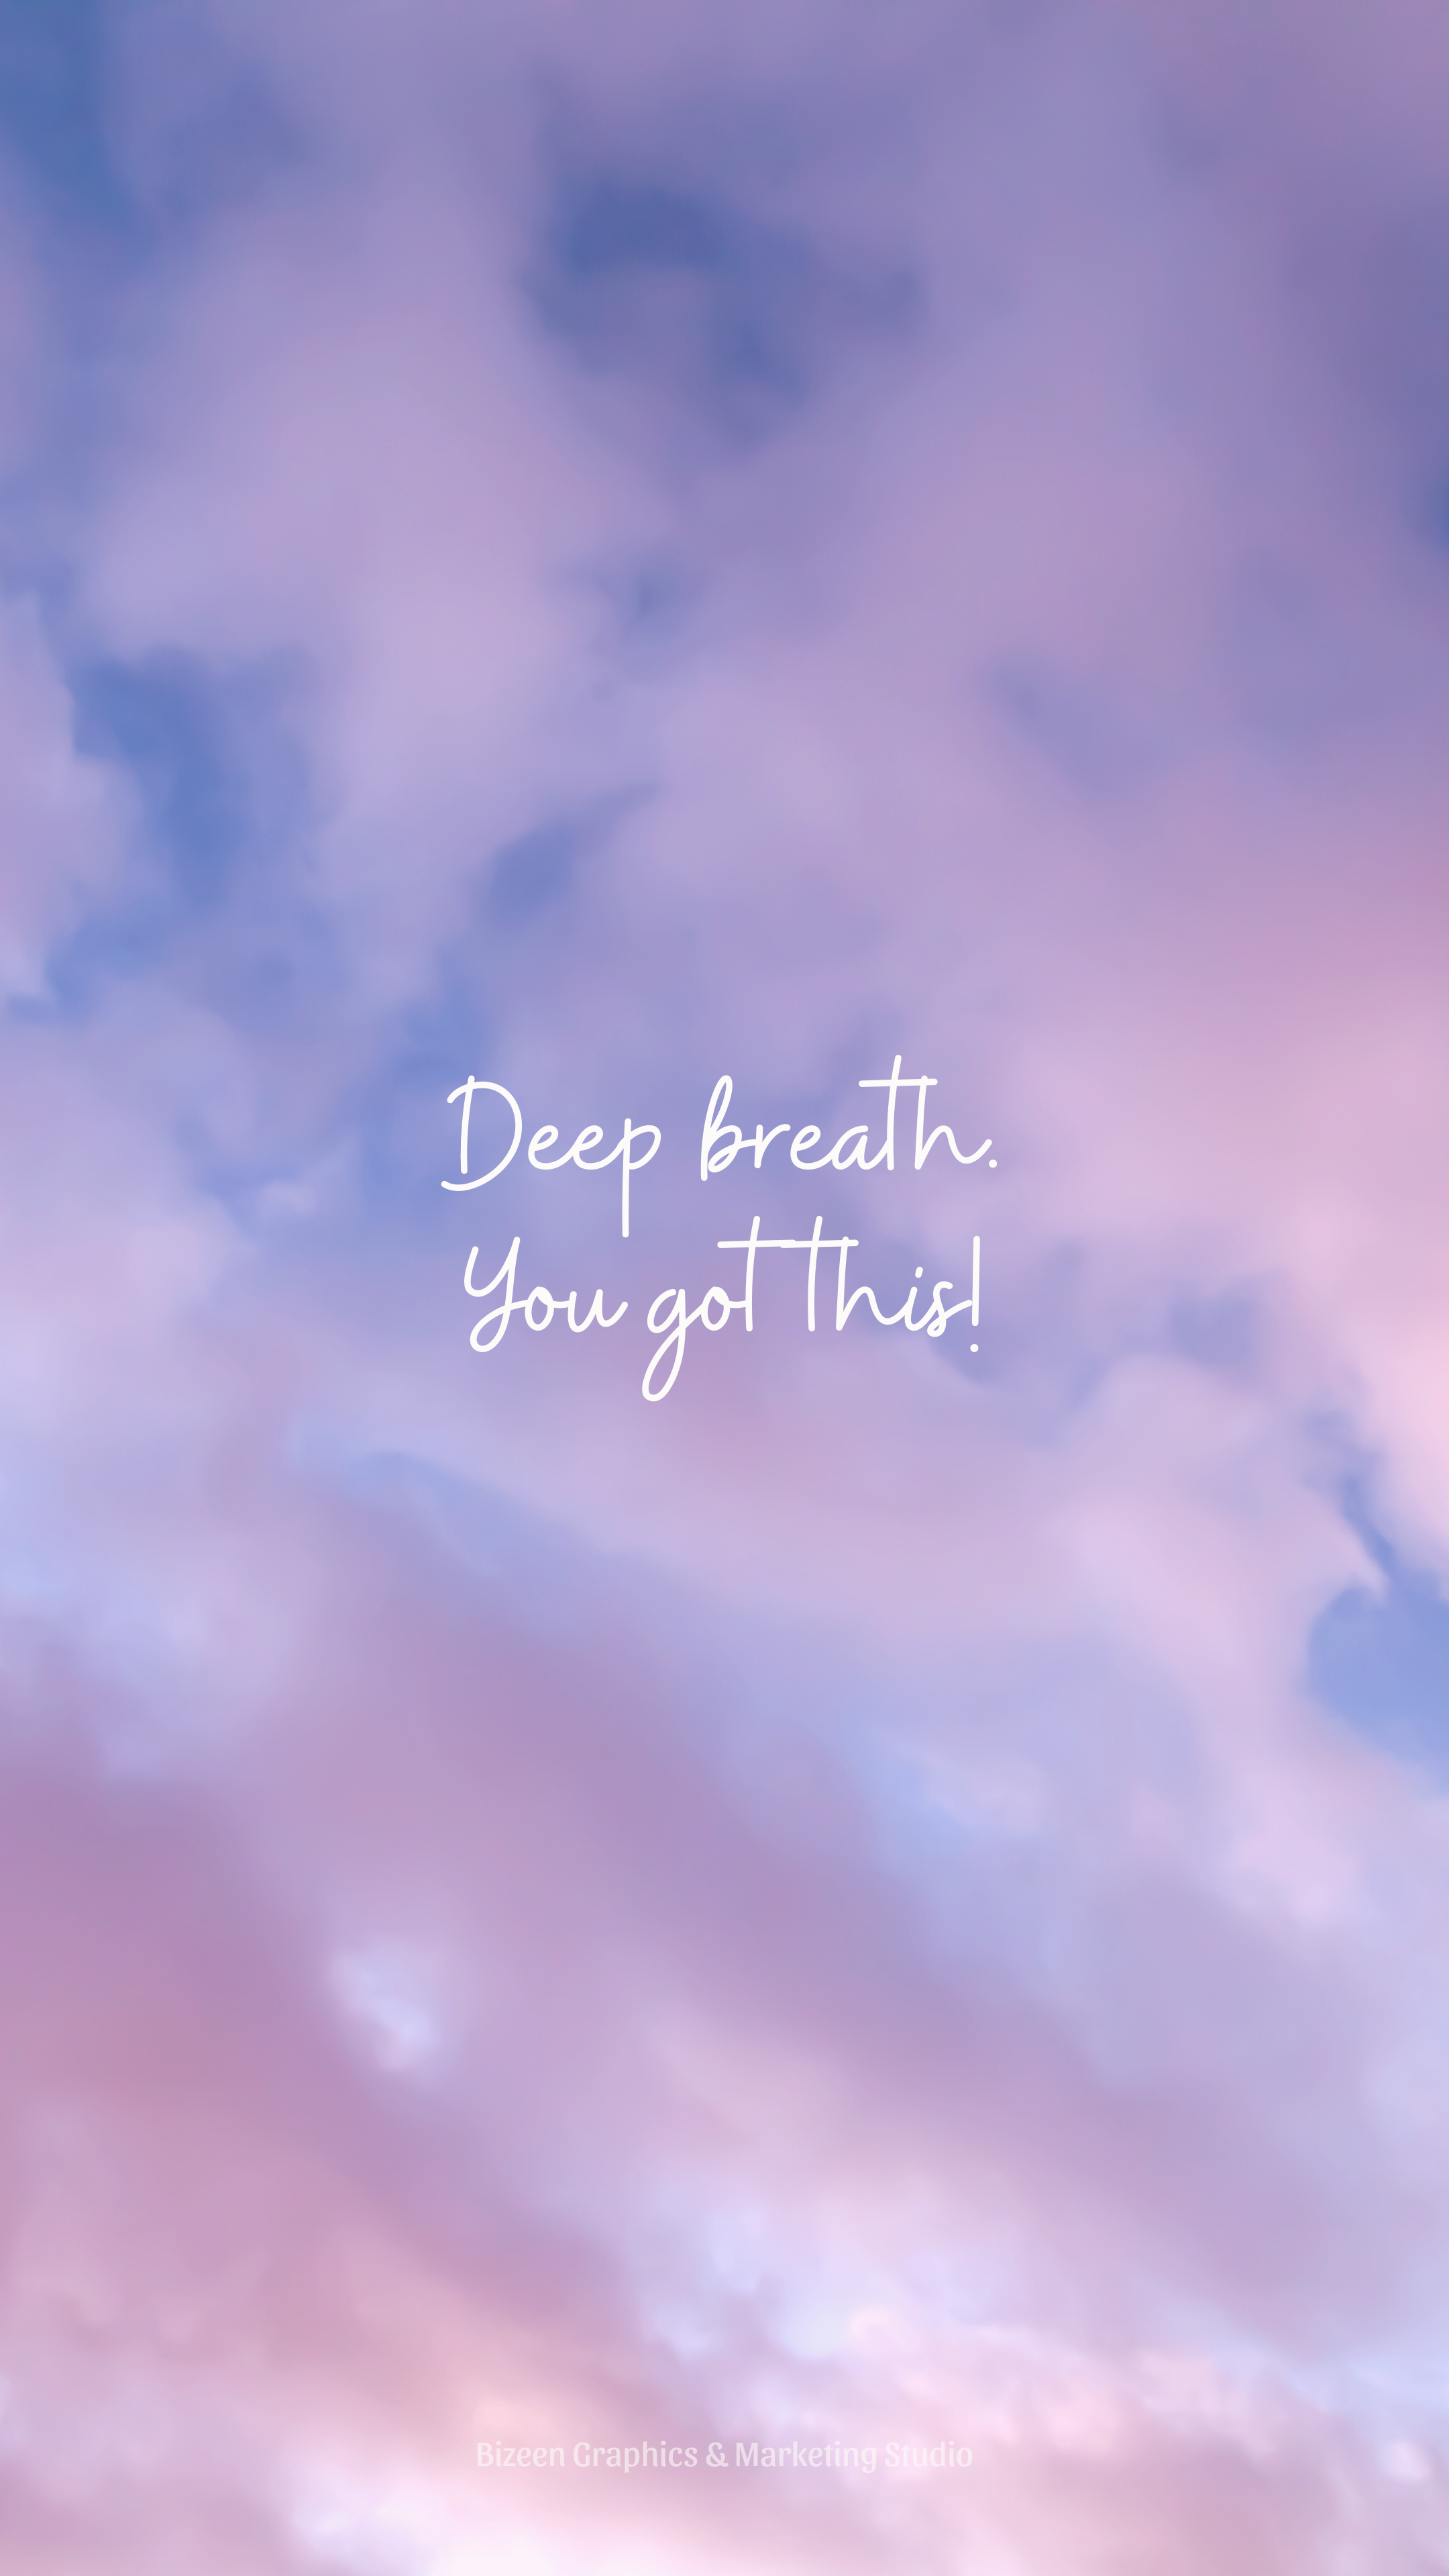 Aesthetic Wallpaper Quotes Motivational You Got This